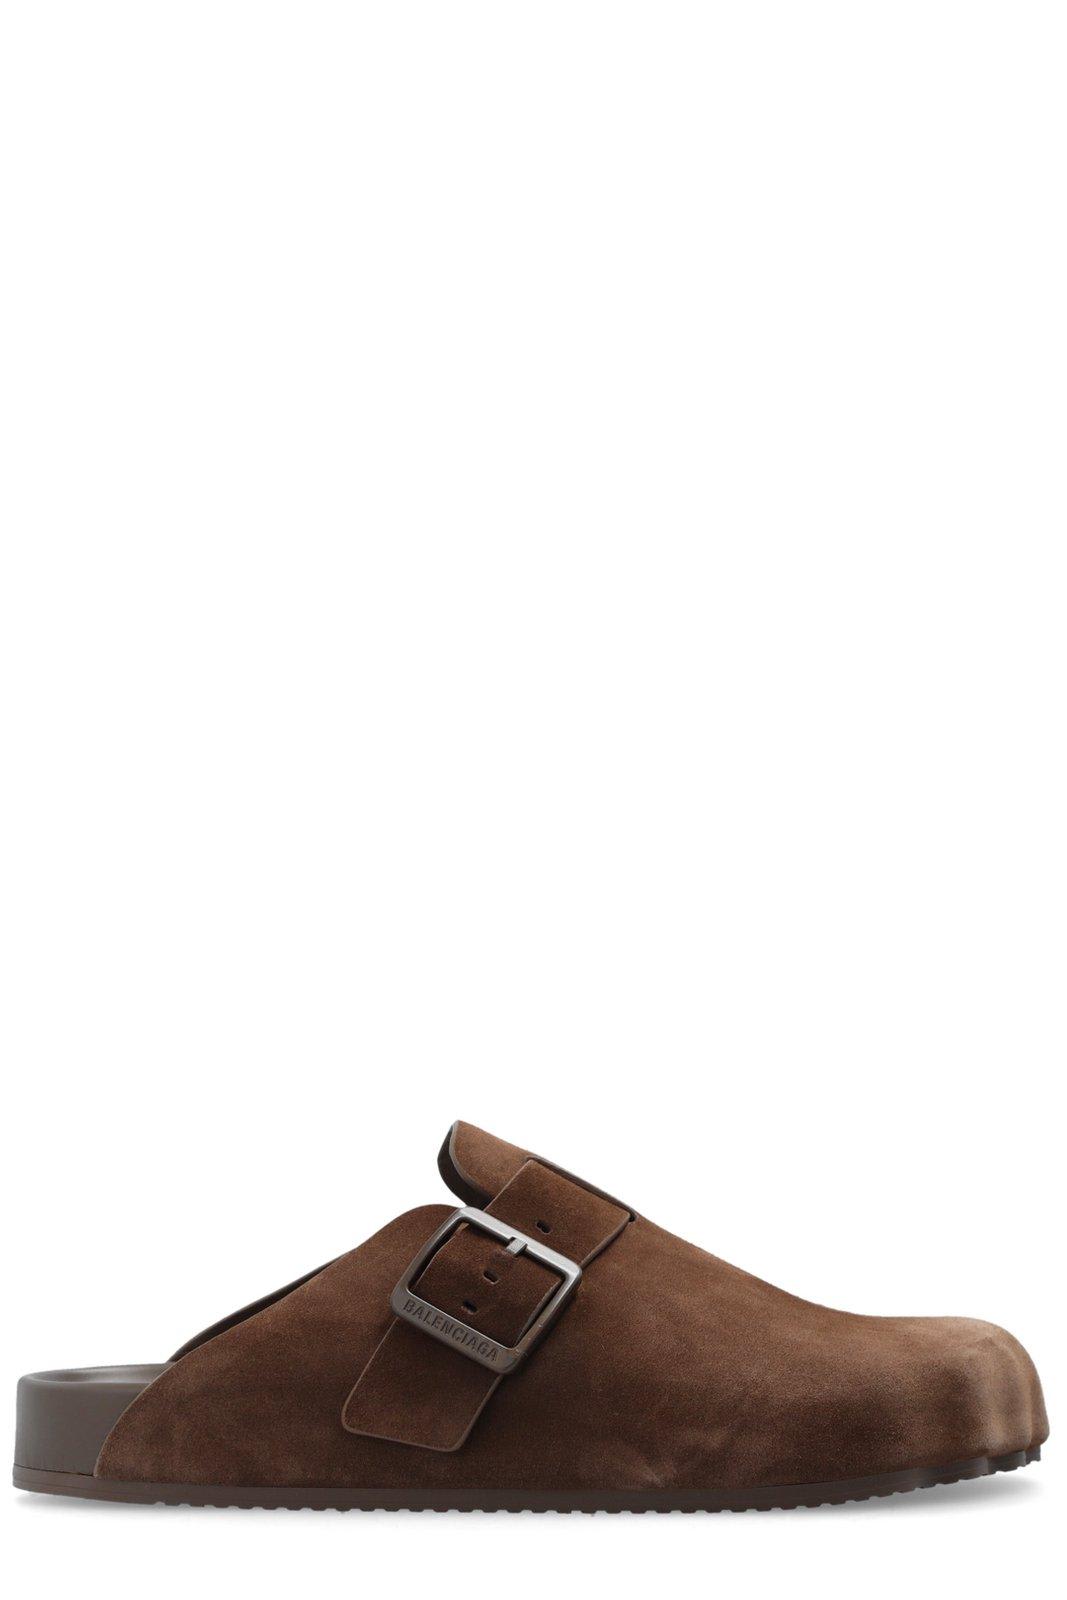 Shop Balenciaga Sunday Buckled Mules In Cold Brown